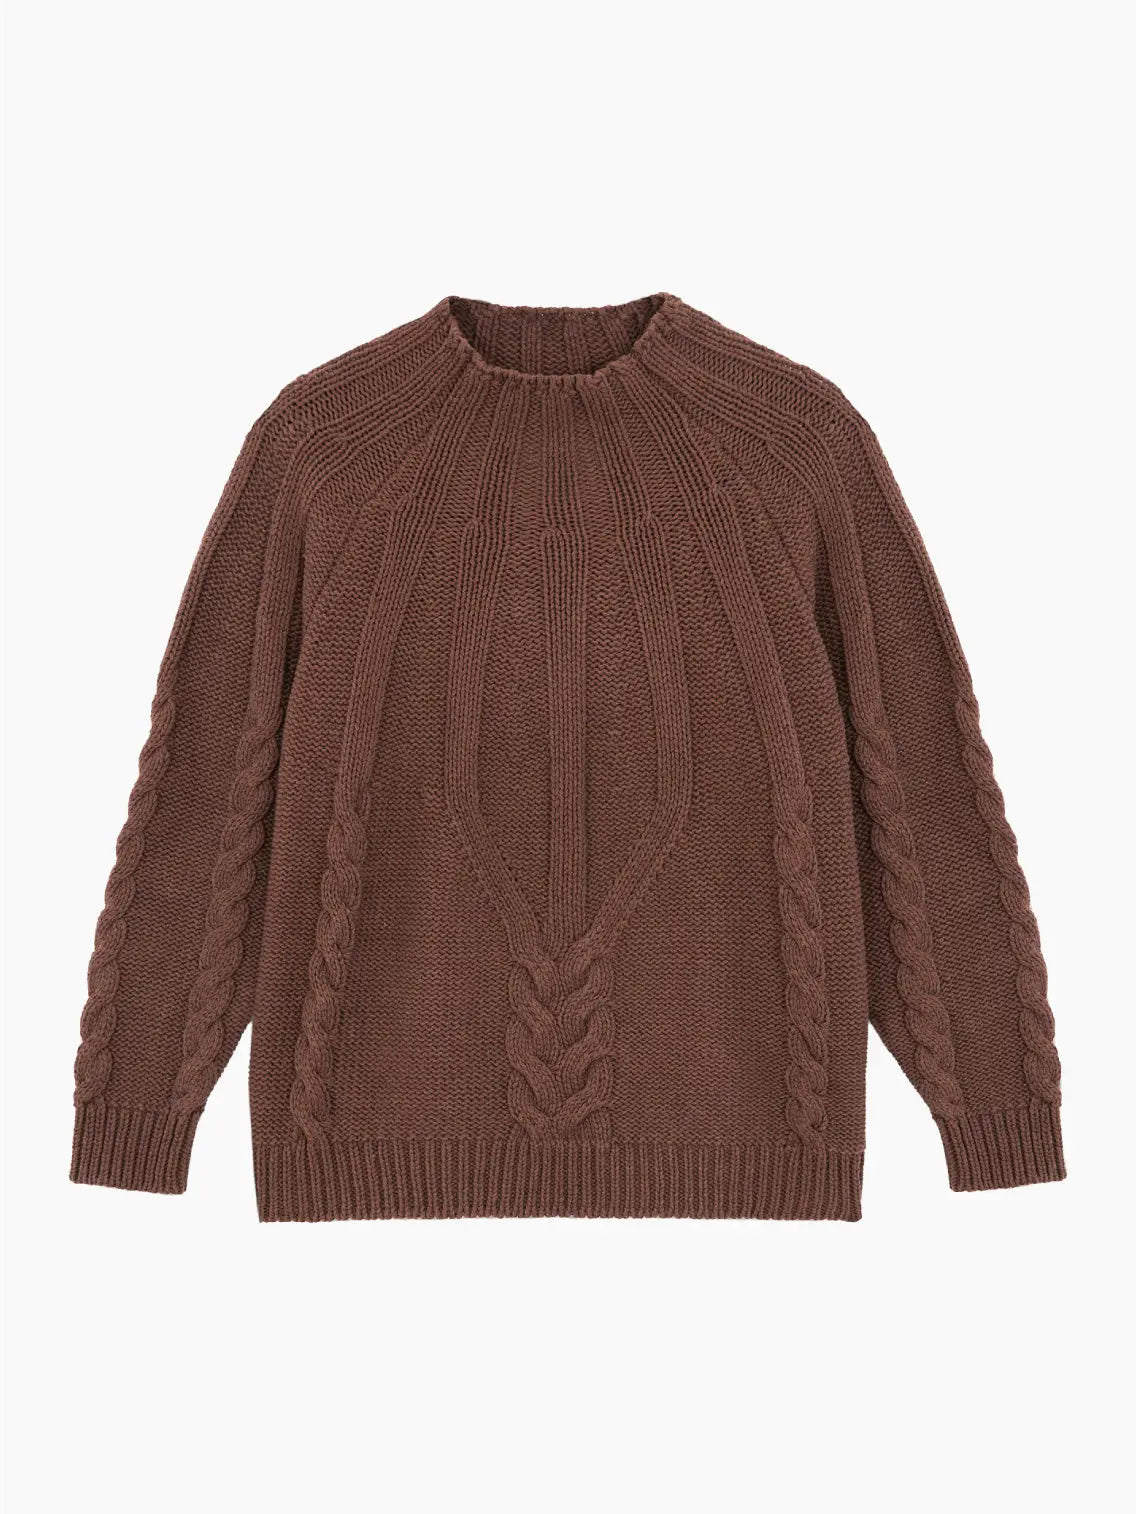 Cotton Cable Sweater Madera with a crew neck by Cordera. The sweater features intricate braided patterns on the front and sleeves, and ribbing at the collar, cuffs, and hem. The overall design is cozy and suitable for cool weather. Find this timeless piece at our Barcelona-based Bassalstore.